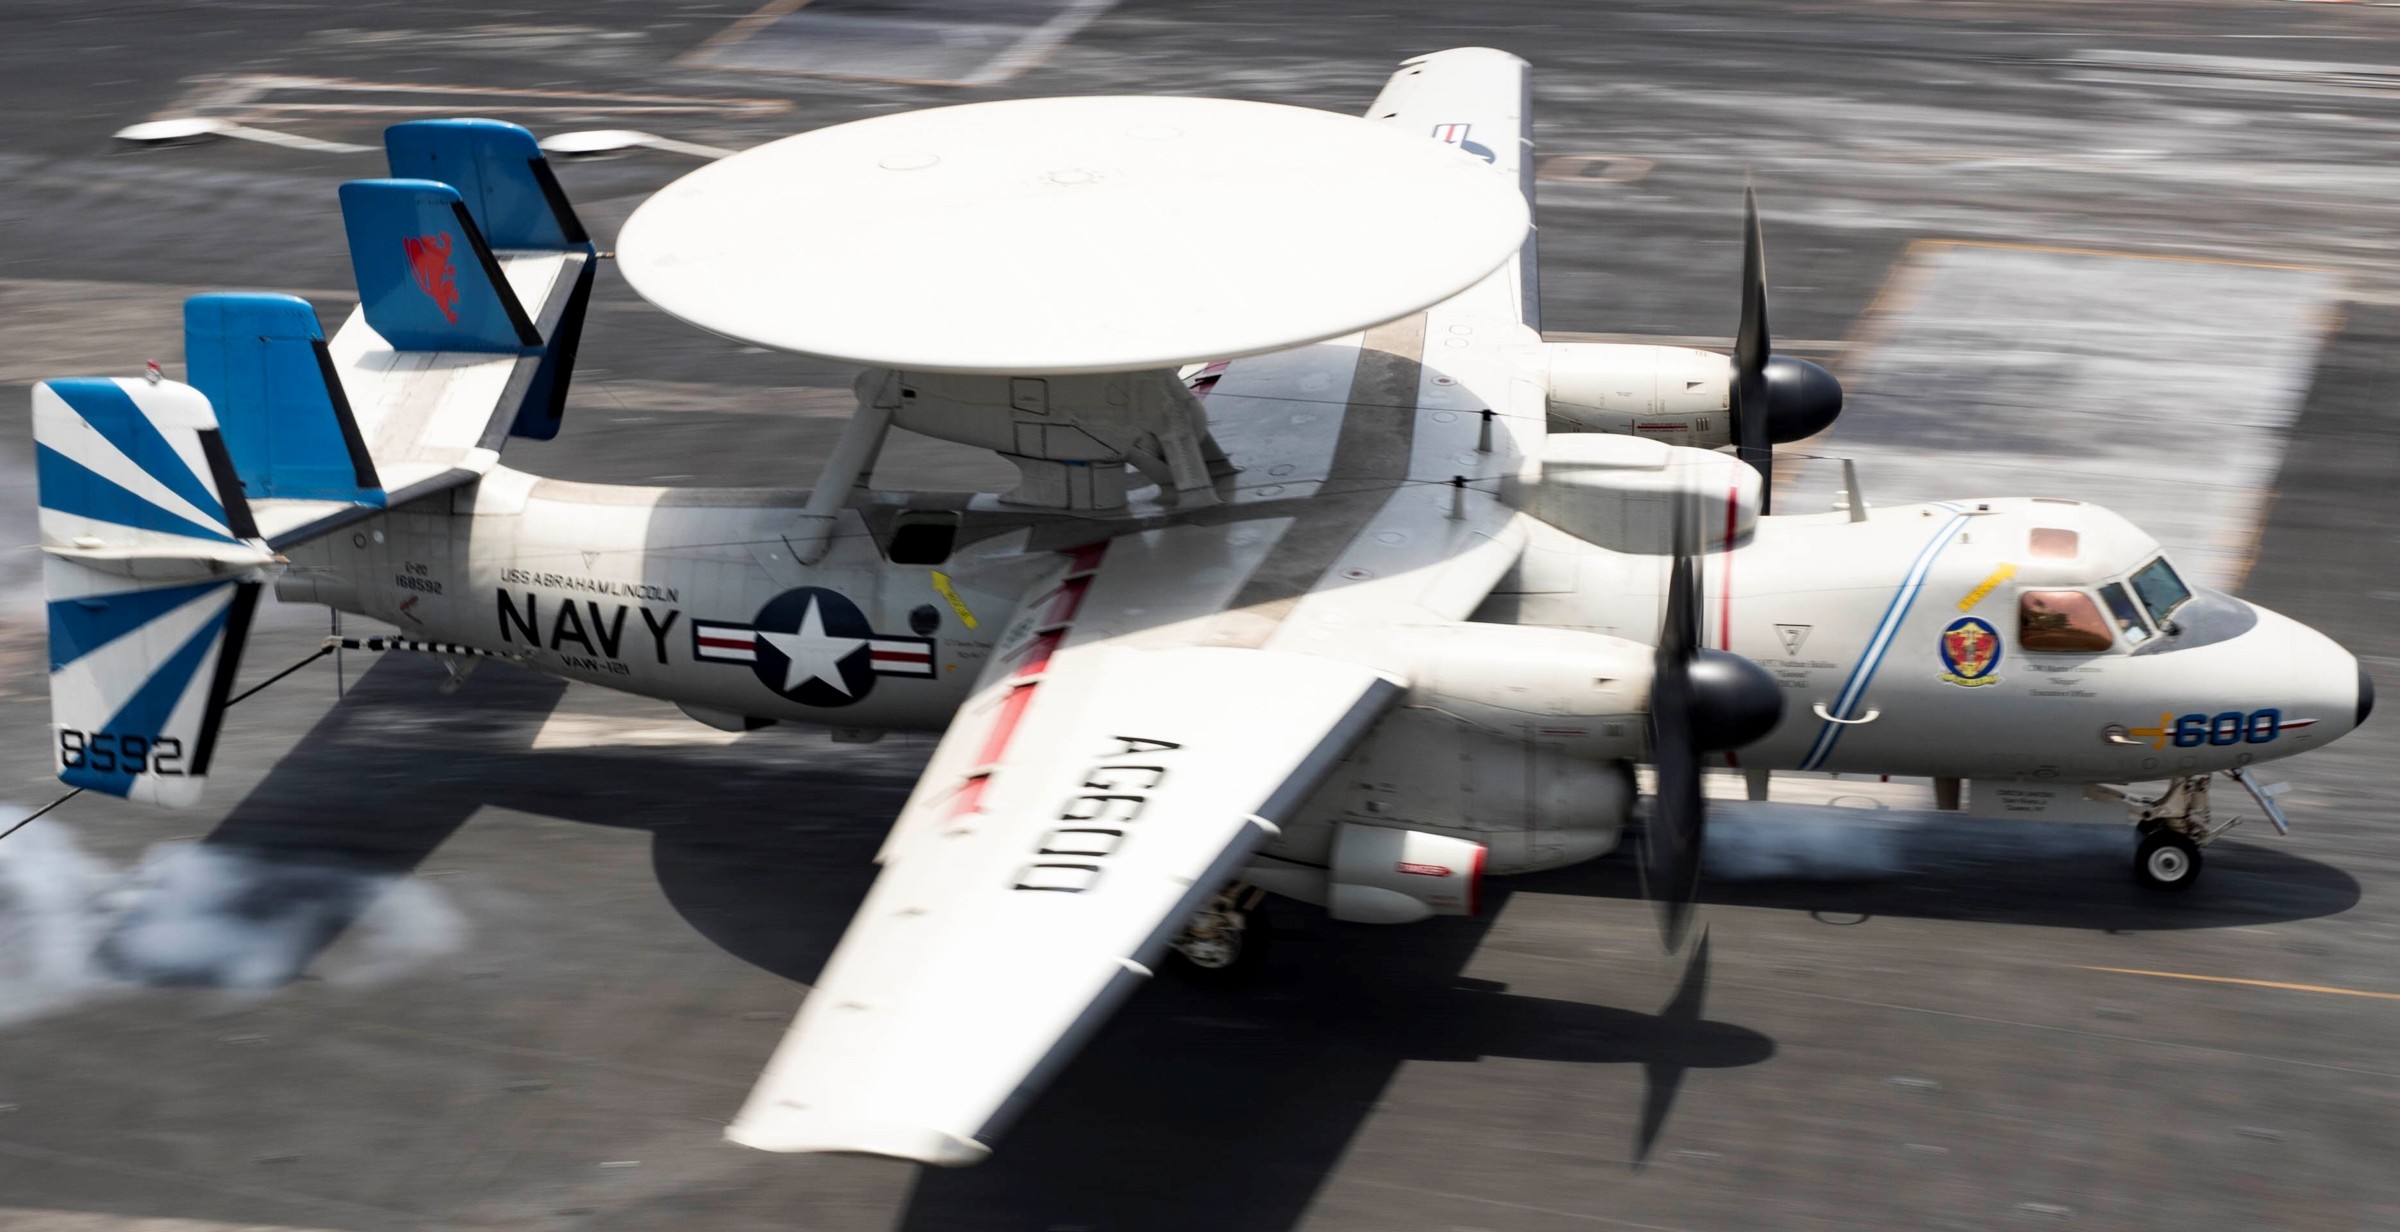 vaw-121 bluetails airborne command and control squadron us navy e-2d advanced hawkeye cvw-7 uss abraham lincoln cvn-72 77